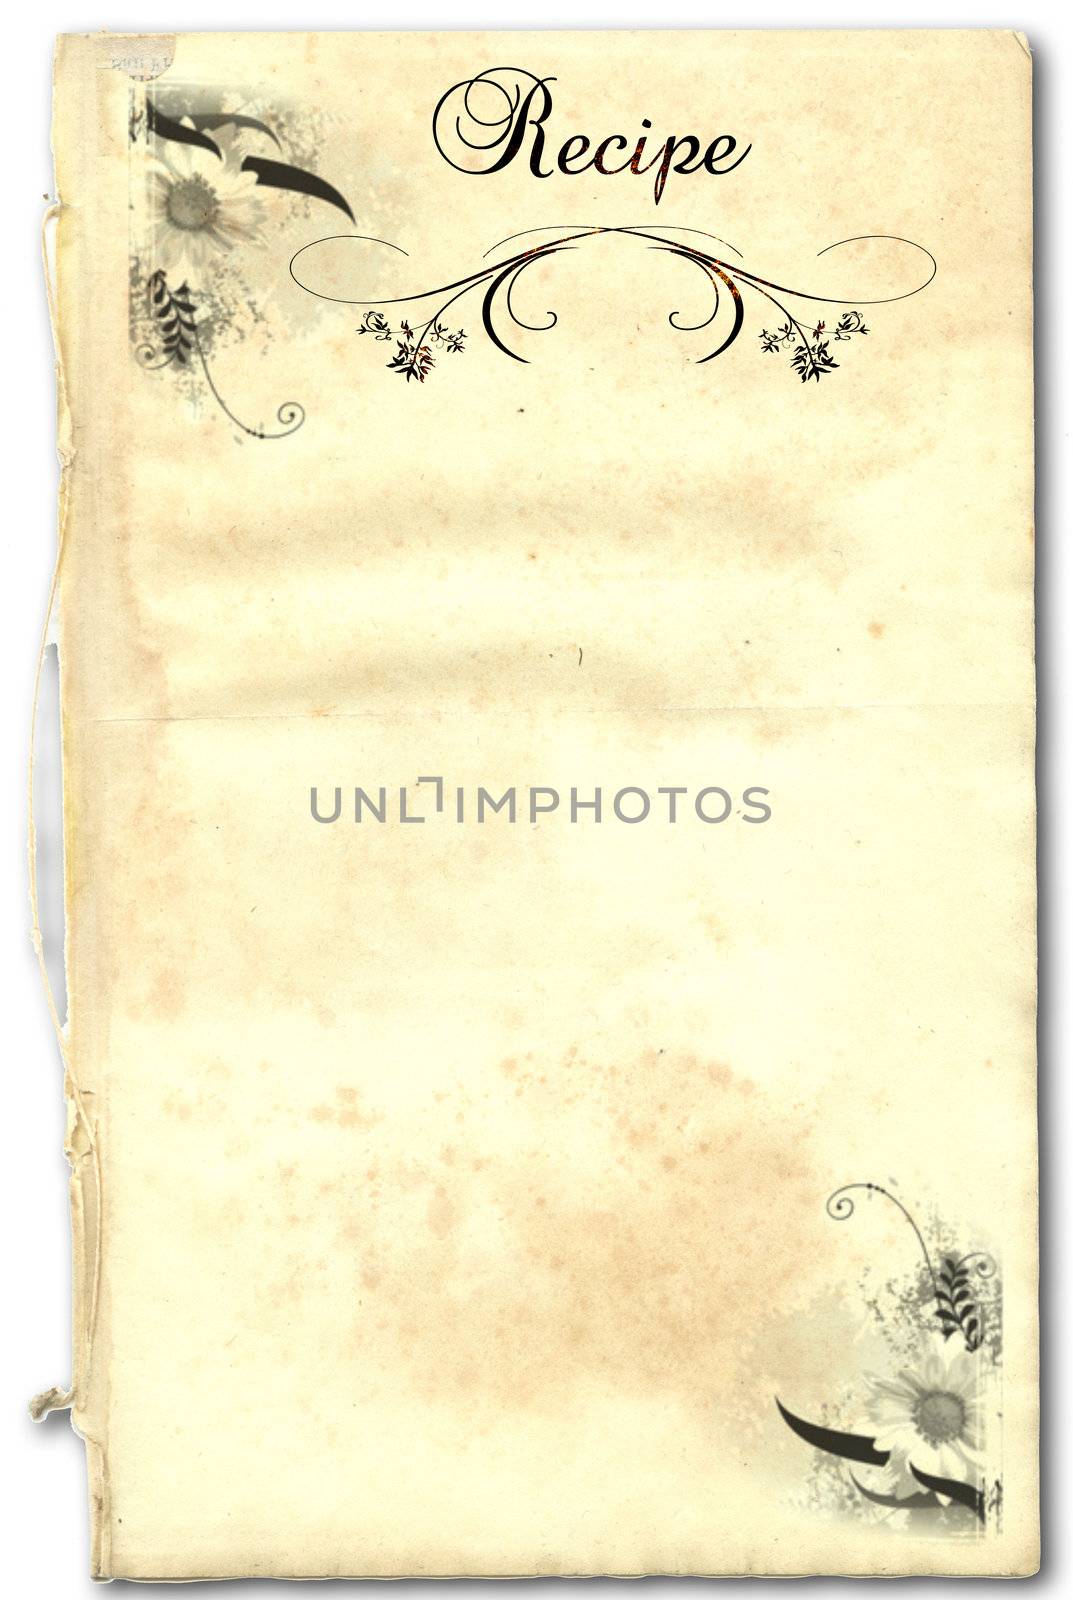 A page from an old book as a recipe on white background